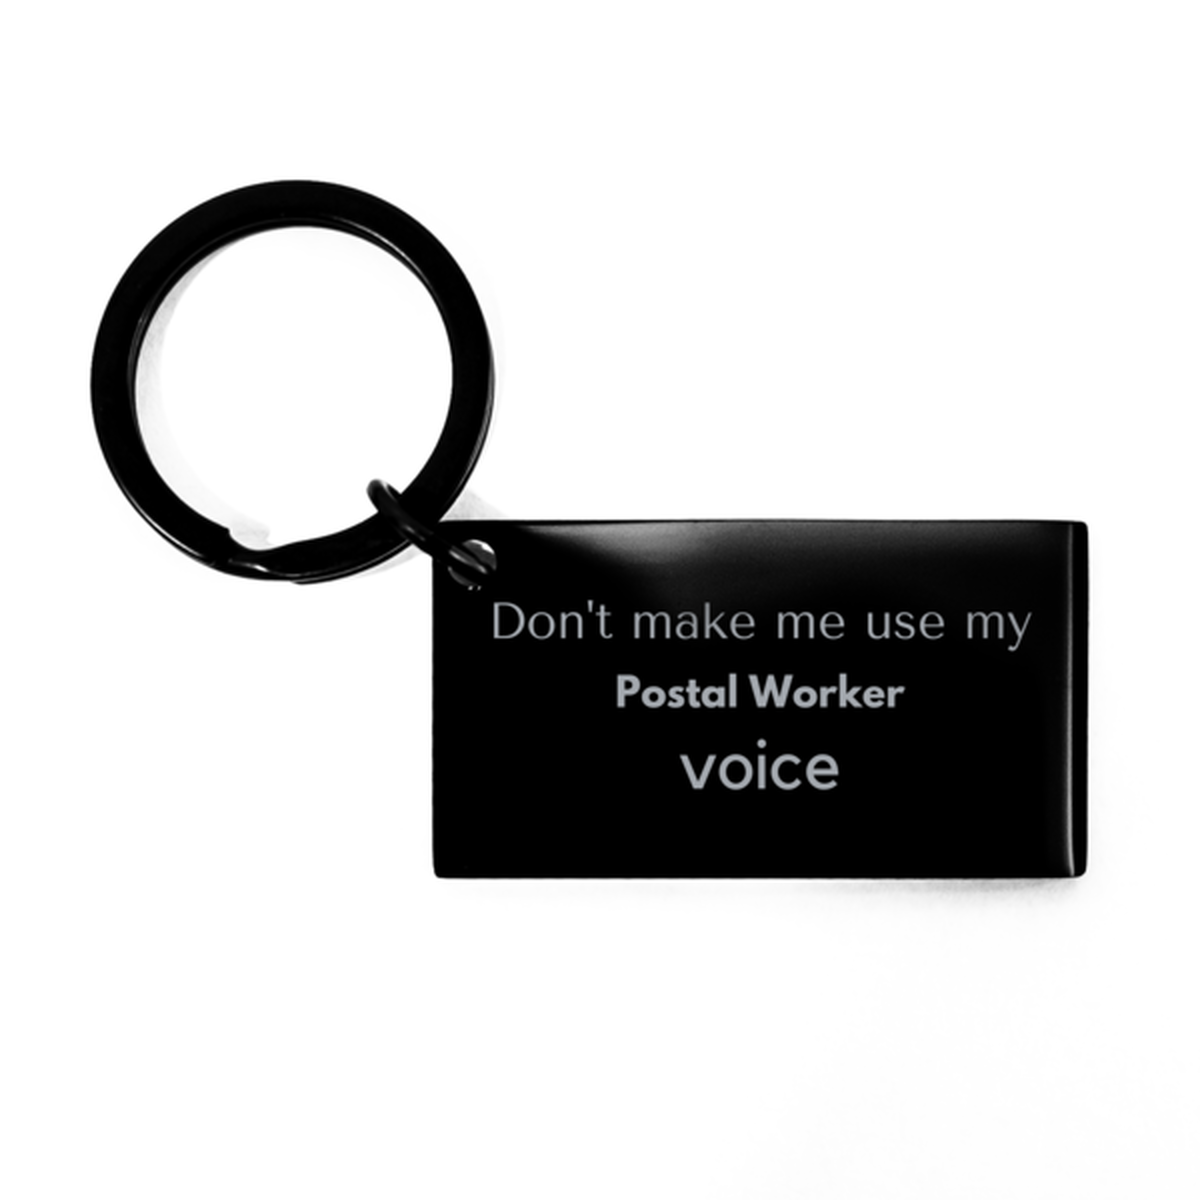 Don't make me use my Postal Worker voice, Sarcasm Postal Worker Gifts, Christmas Postal Worker Keychain Birthday Unique Gifts For Postal Worker Coworkers, Men, Women, Colleague, Friends